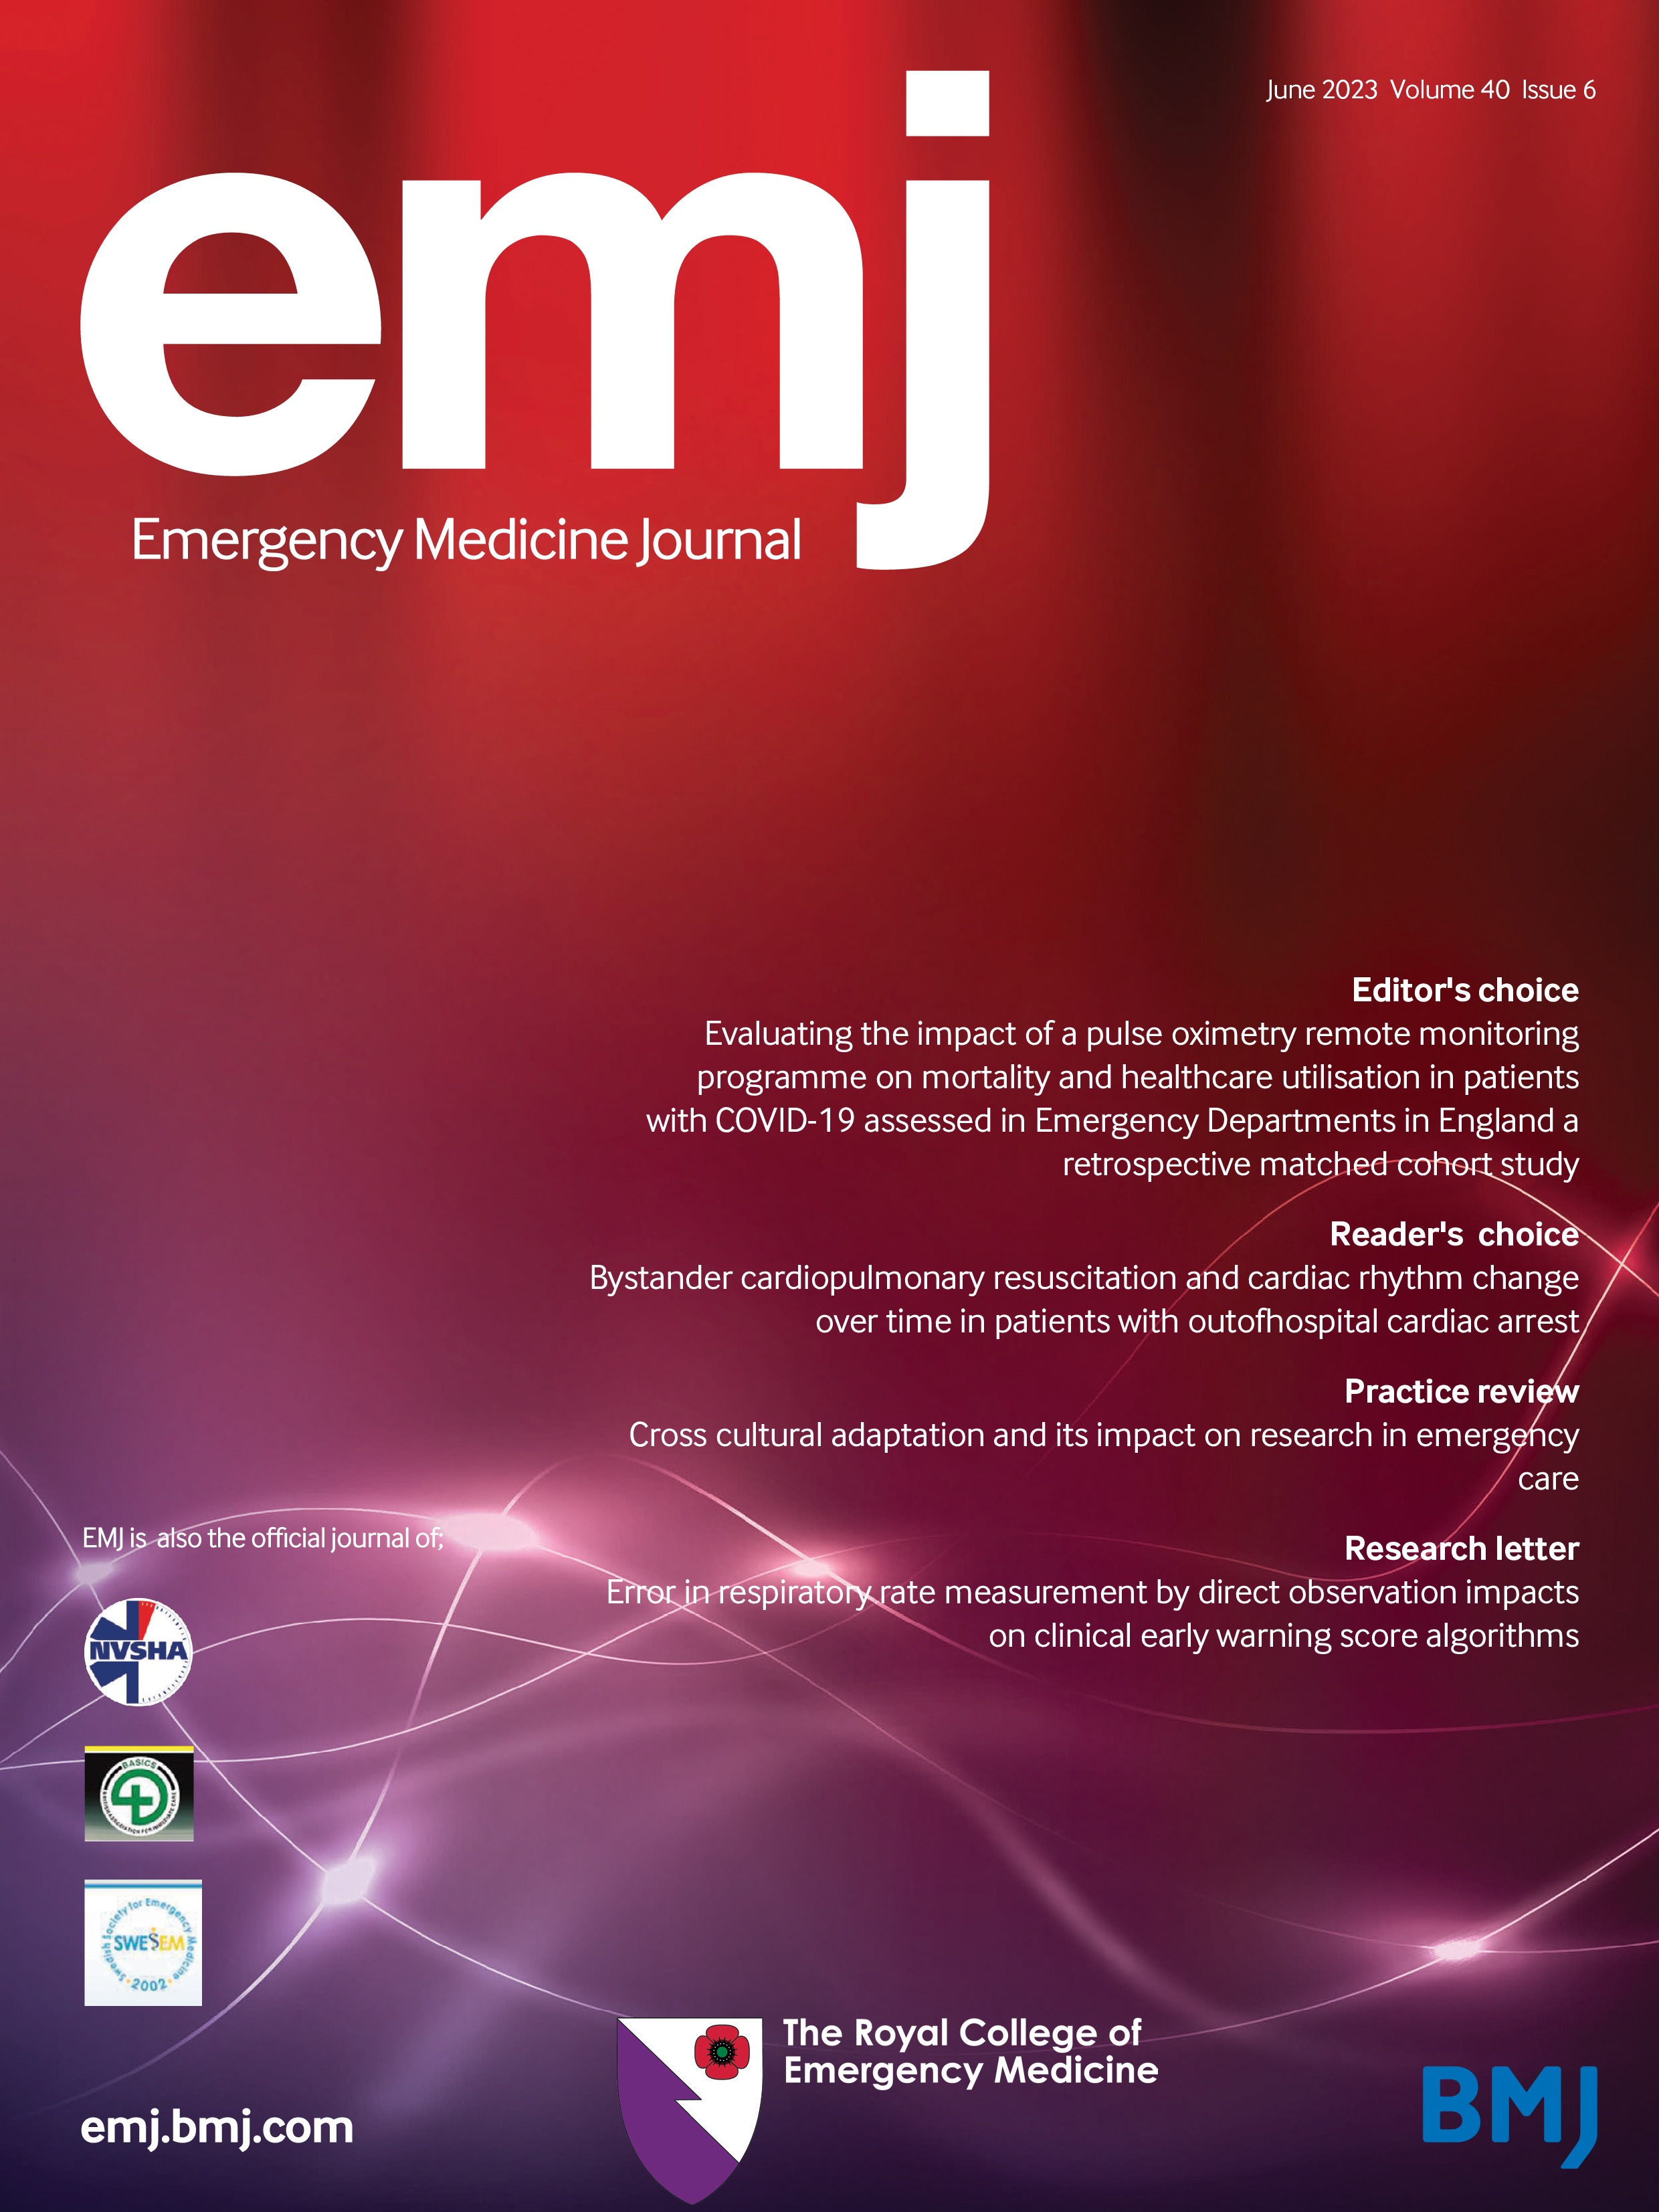 Cross-cultural adaptation and its impact on research in emergency care